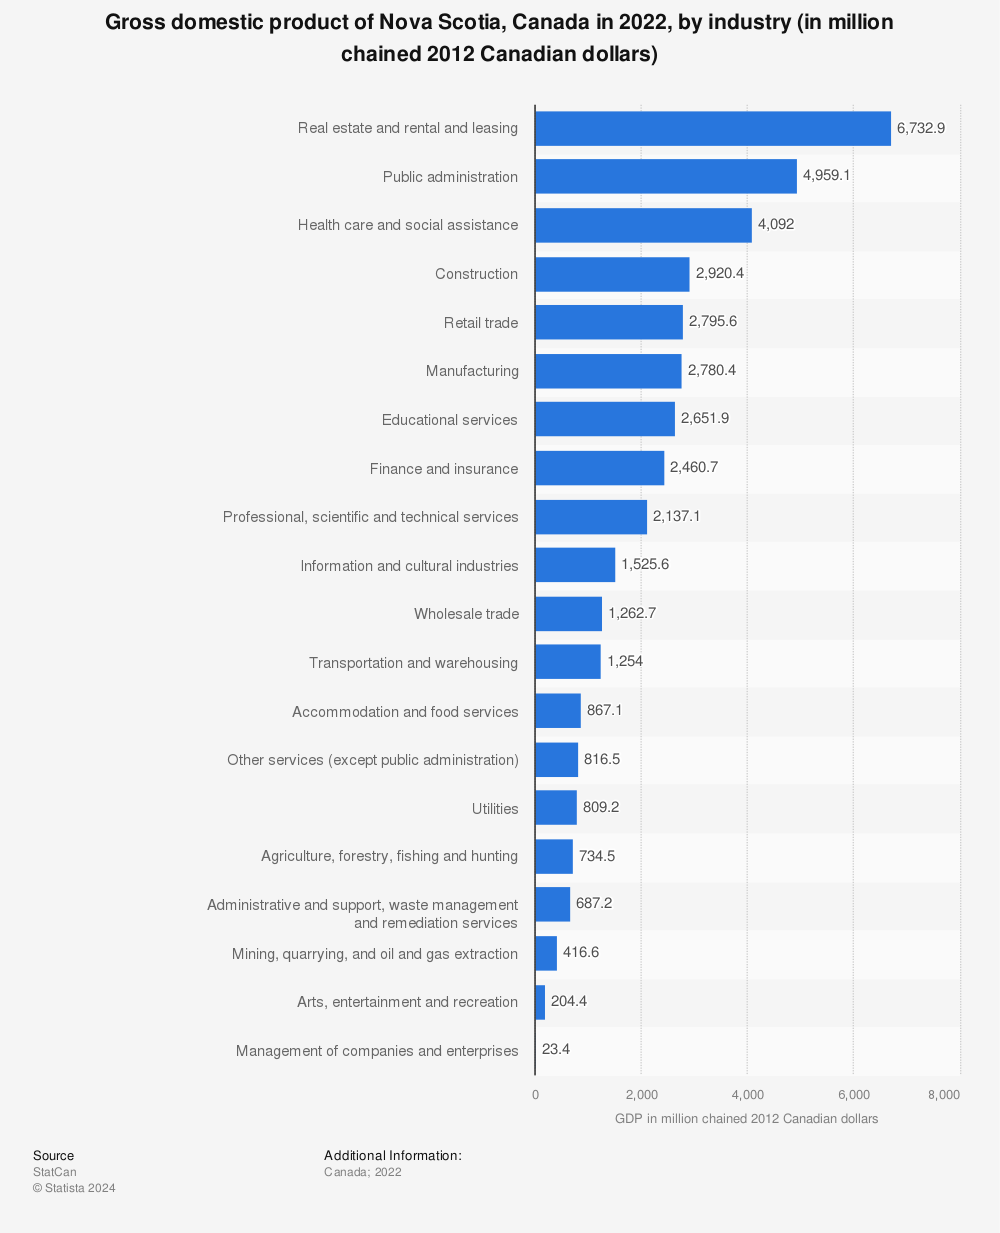 Statistic: Gross domestic product of Nova Scotia, Canada in 2022, by industry (in million chained 2012 Canadian dollars) | Statista